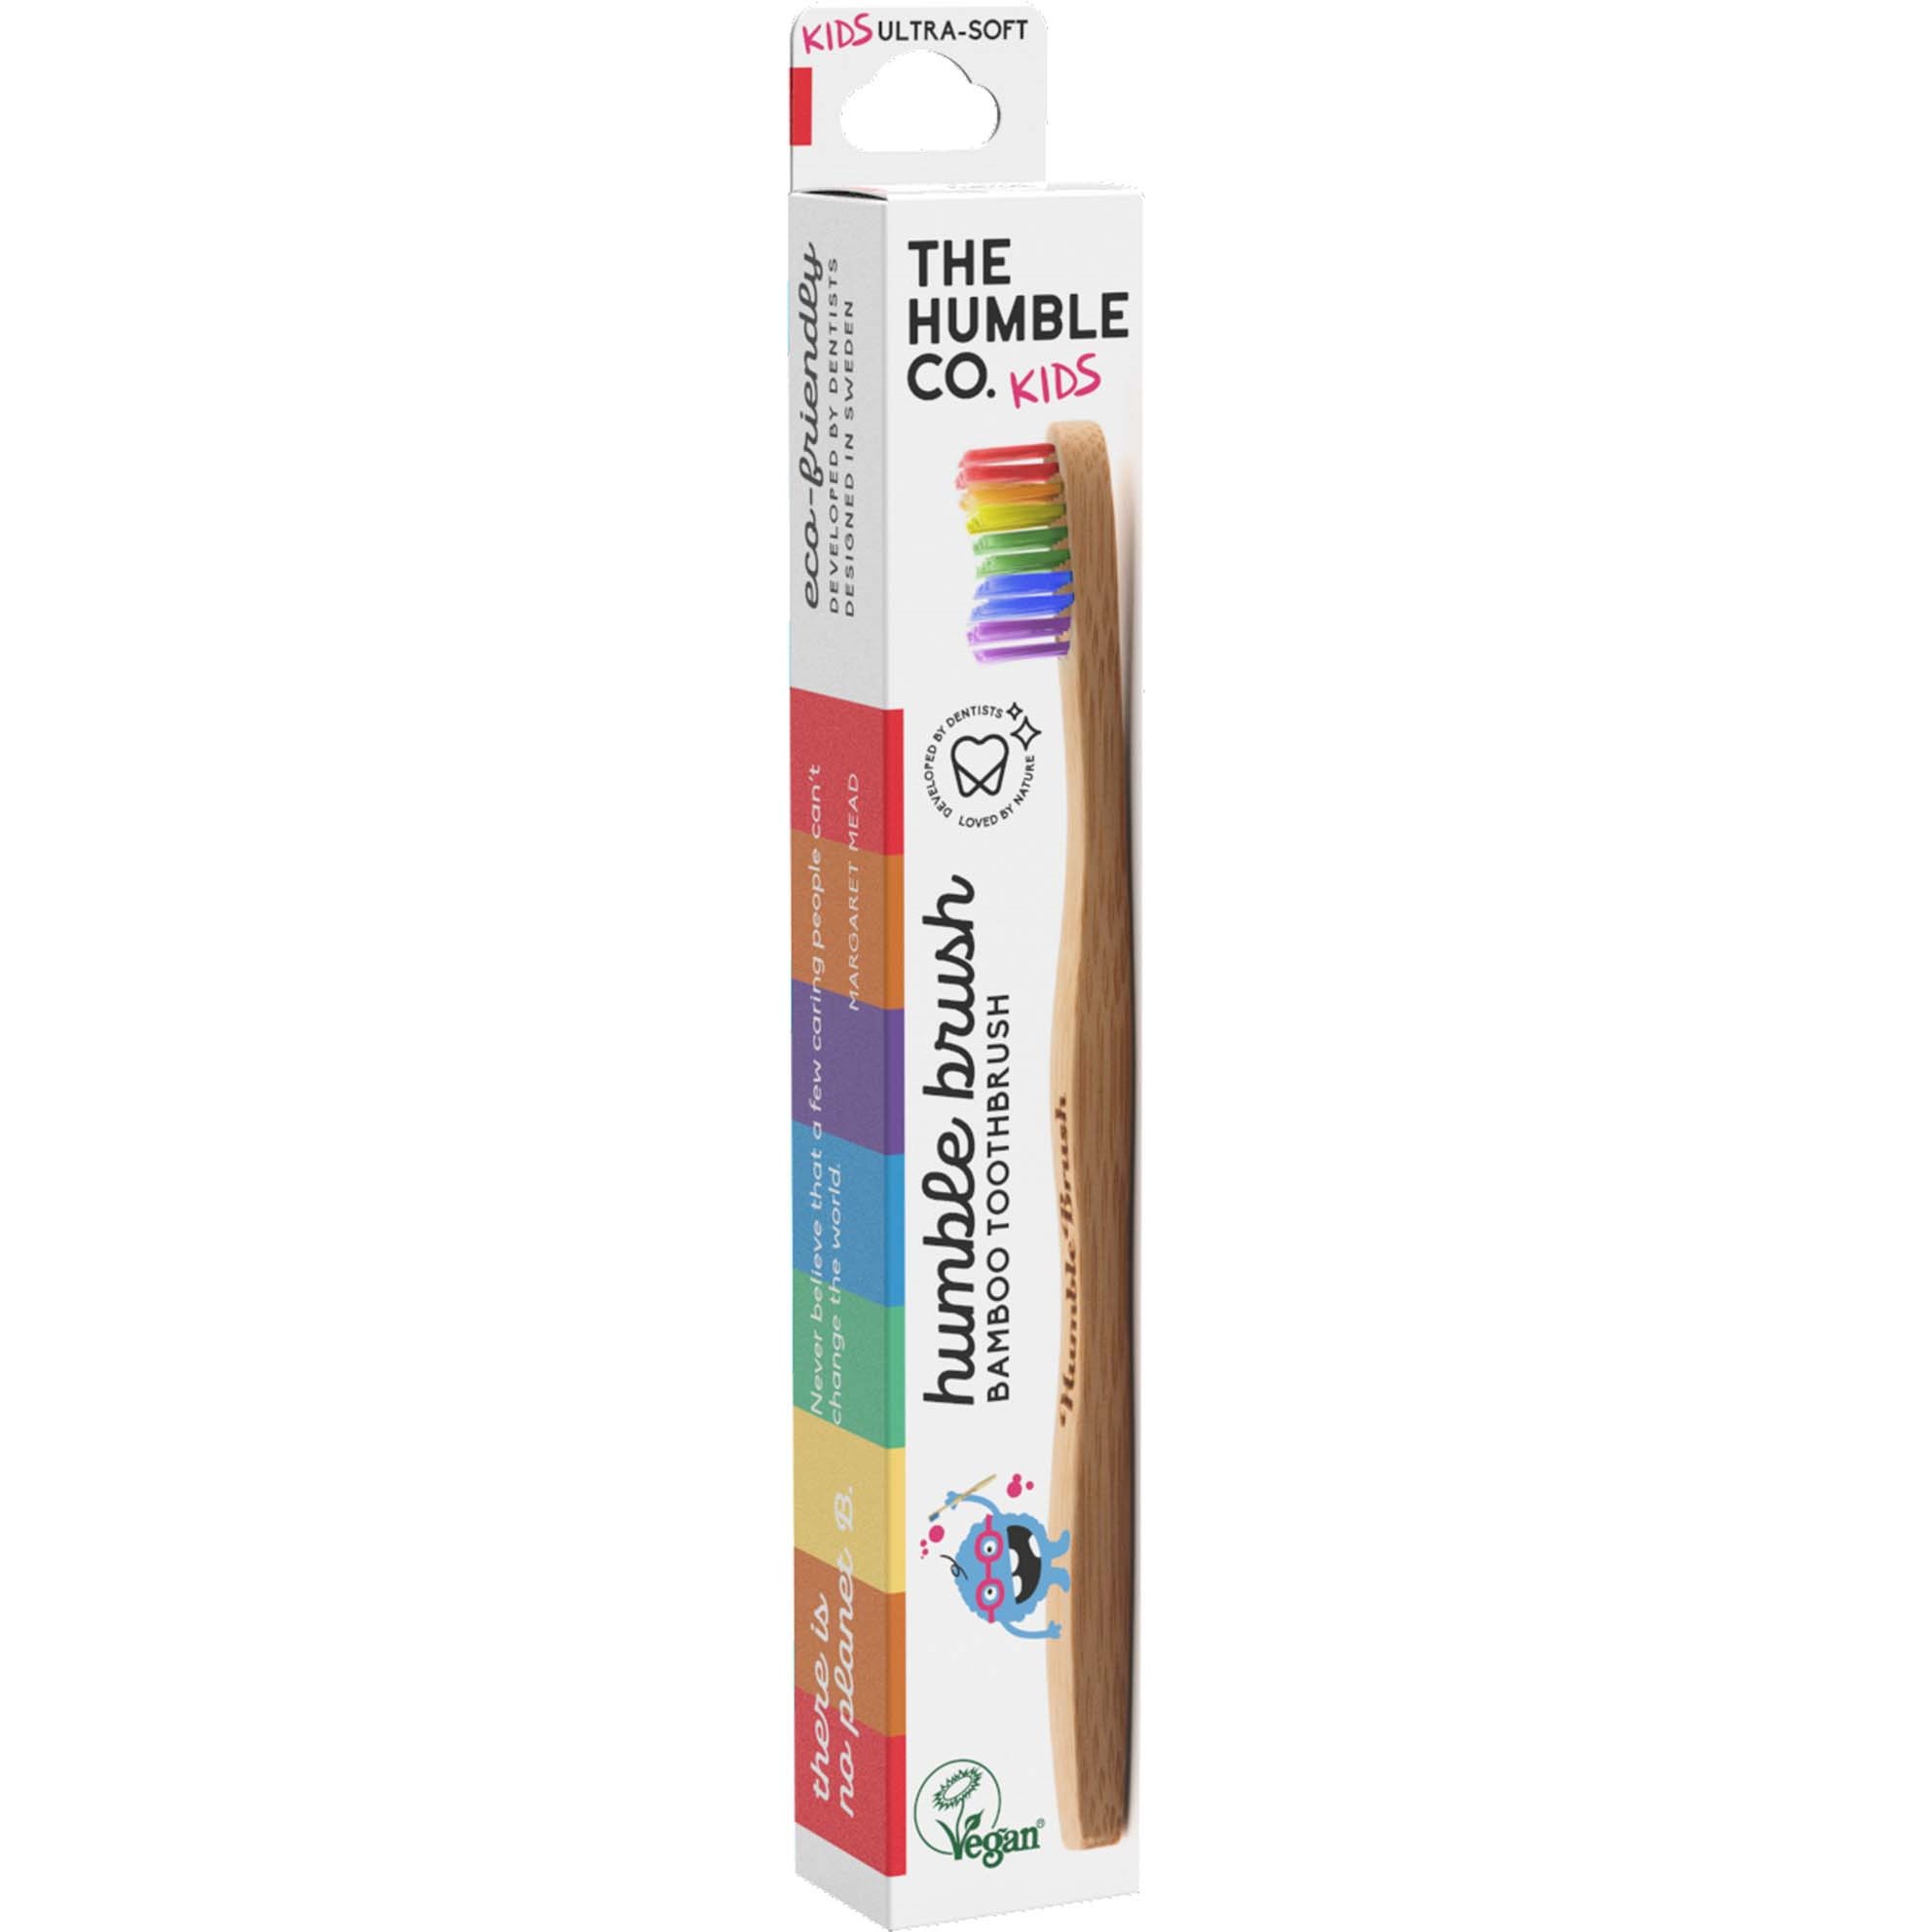 The Humble Co. Kids Proud Edition Bamboo Toothbrush Ultra-soft